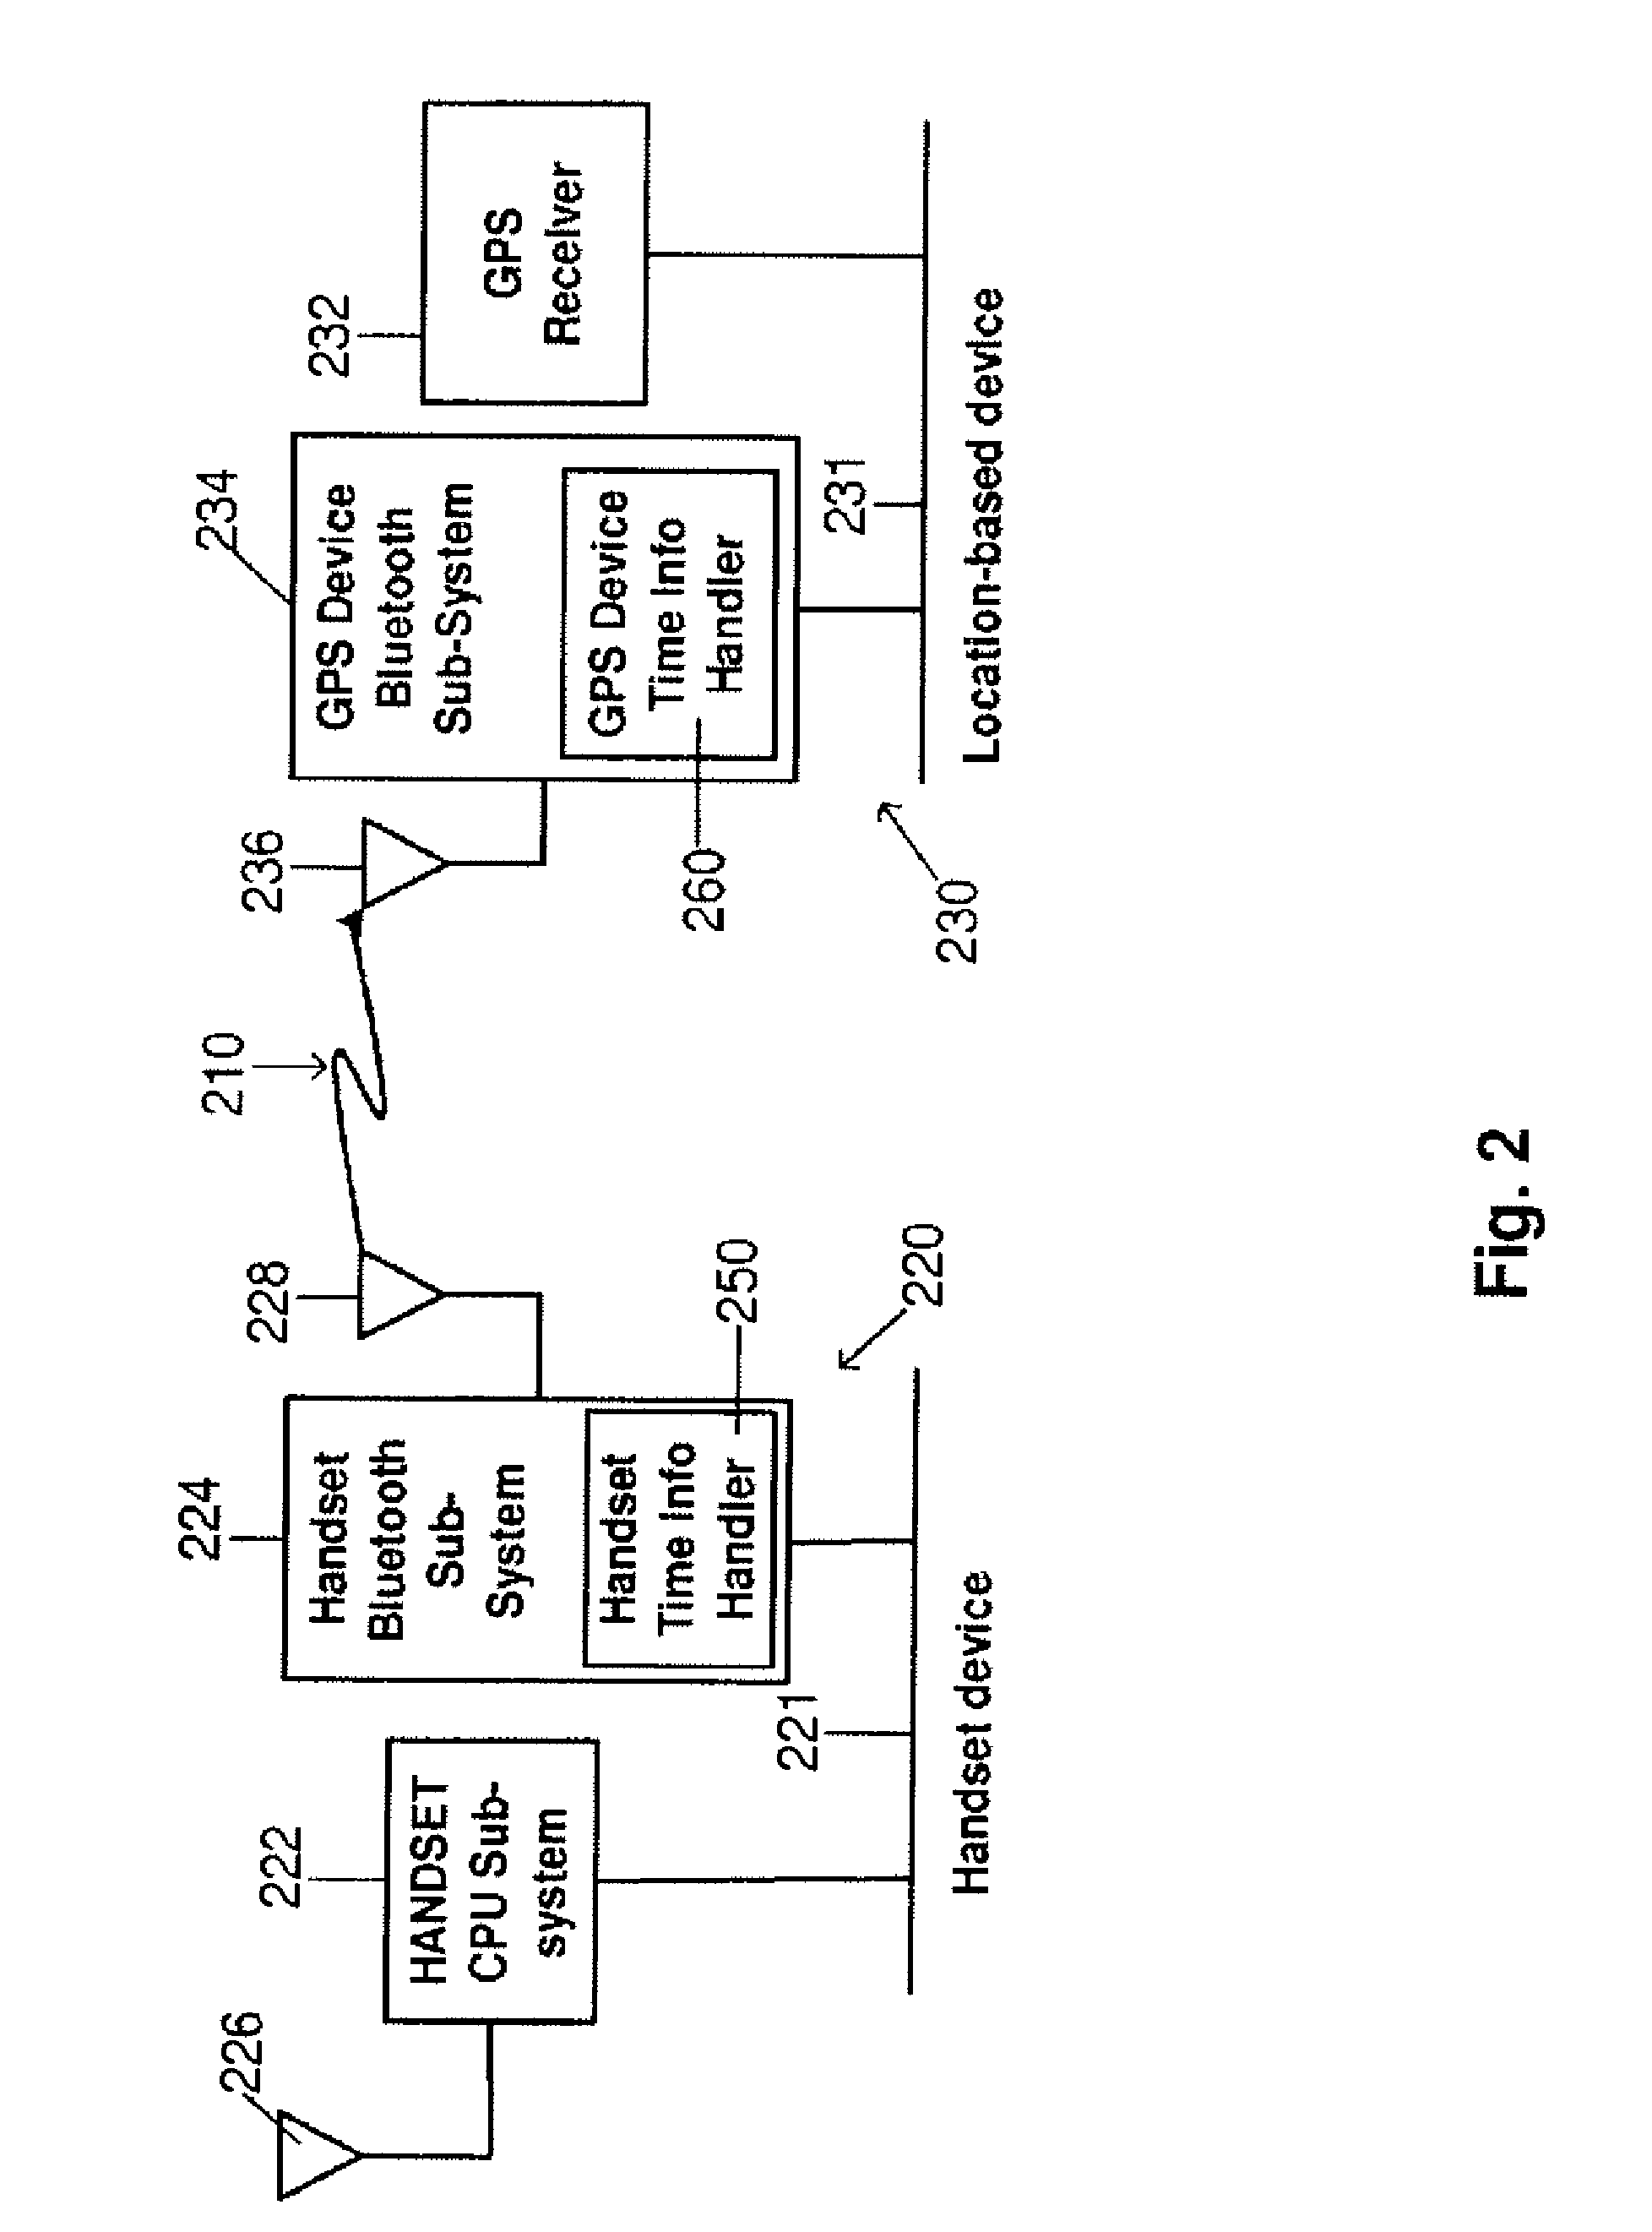 System and method for providing aiding information to a satellite positioning system receiver over short-range wireless connections